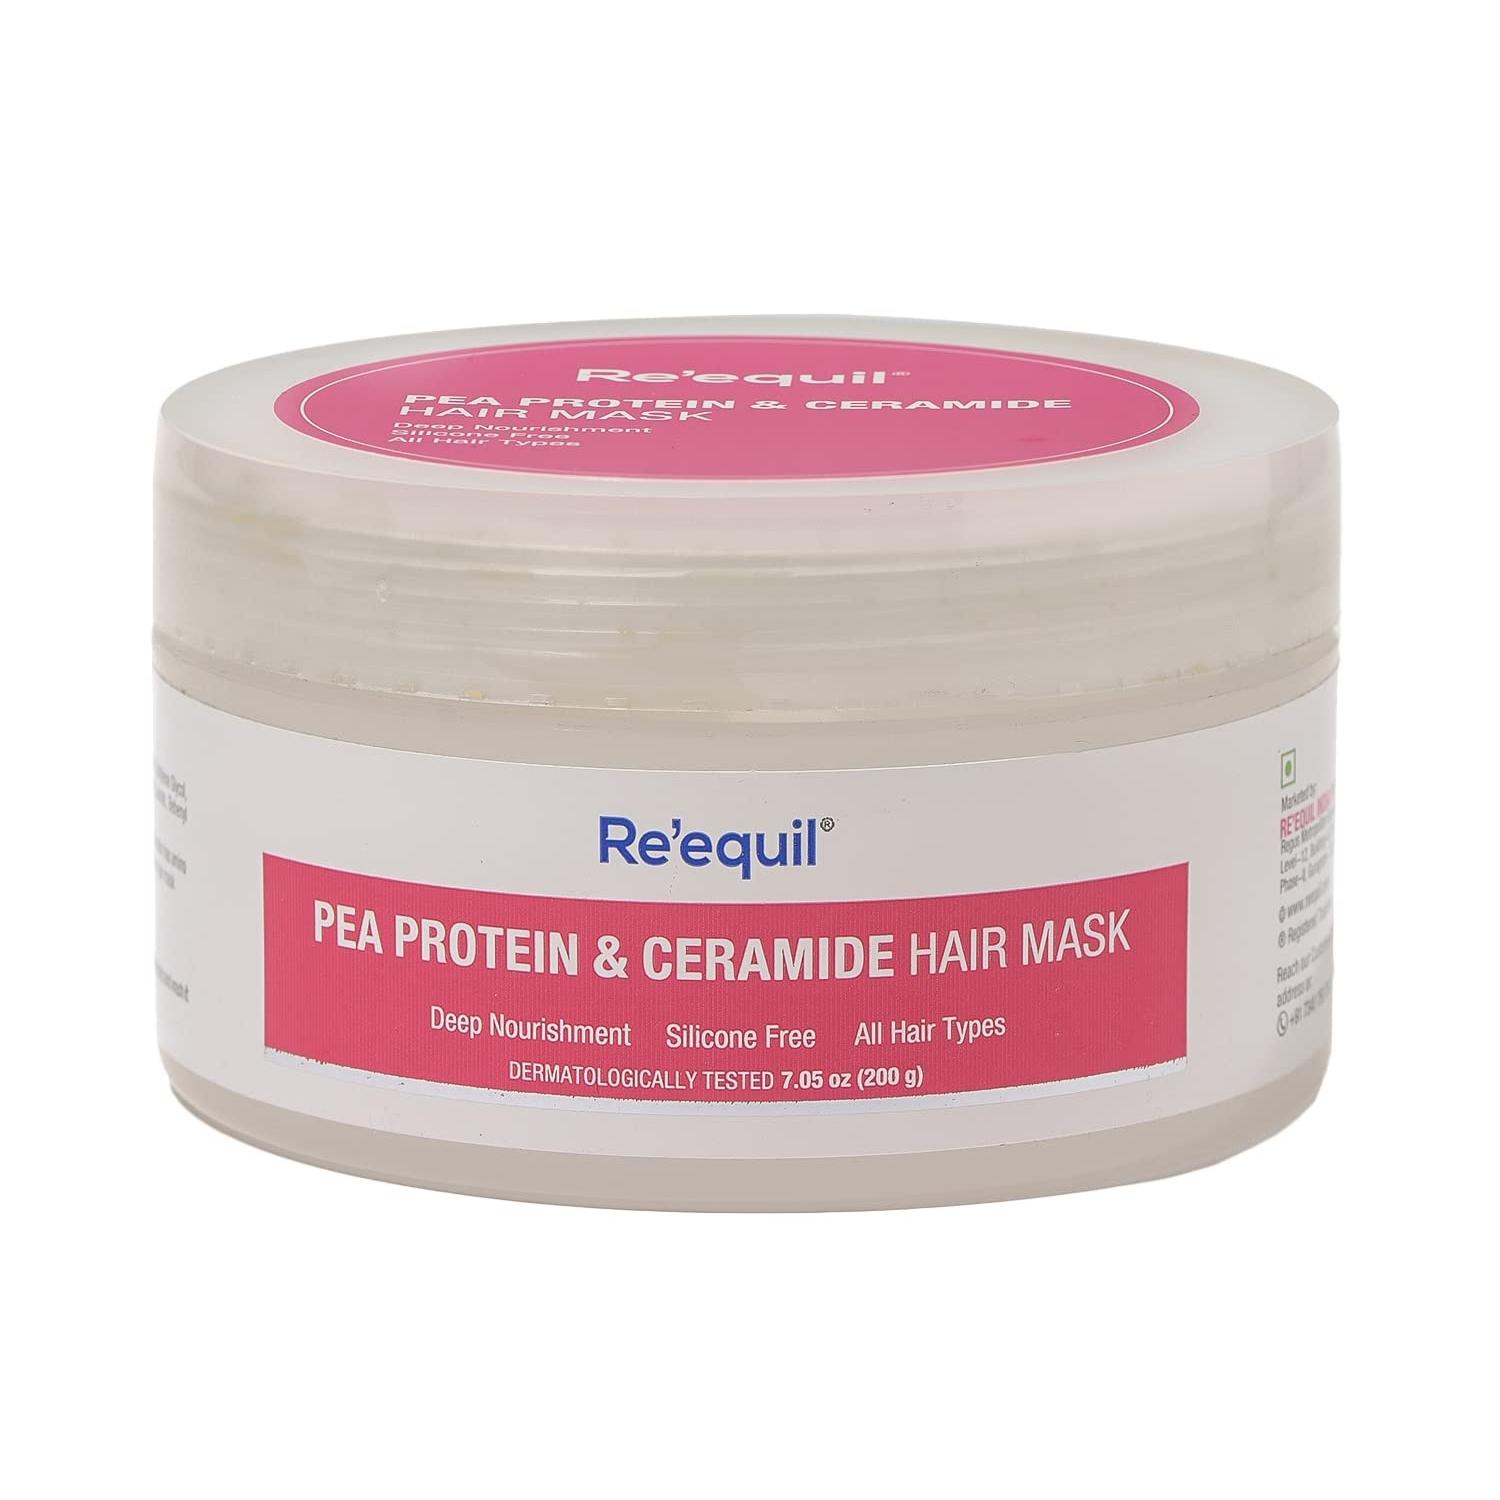 re'equil-pea-protein-&-ceramide-hair-mask-(200g)